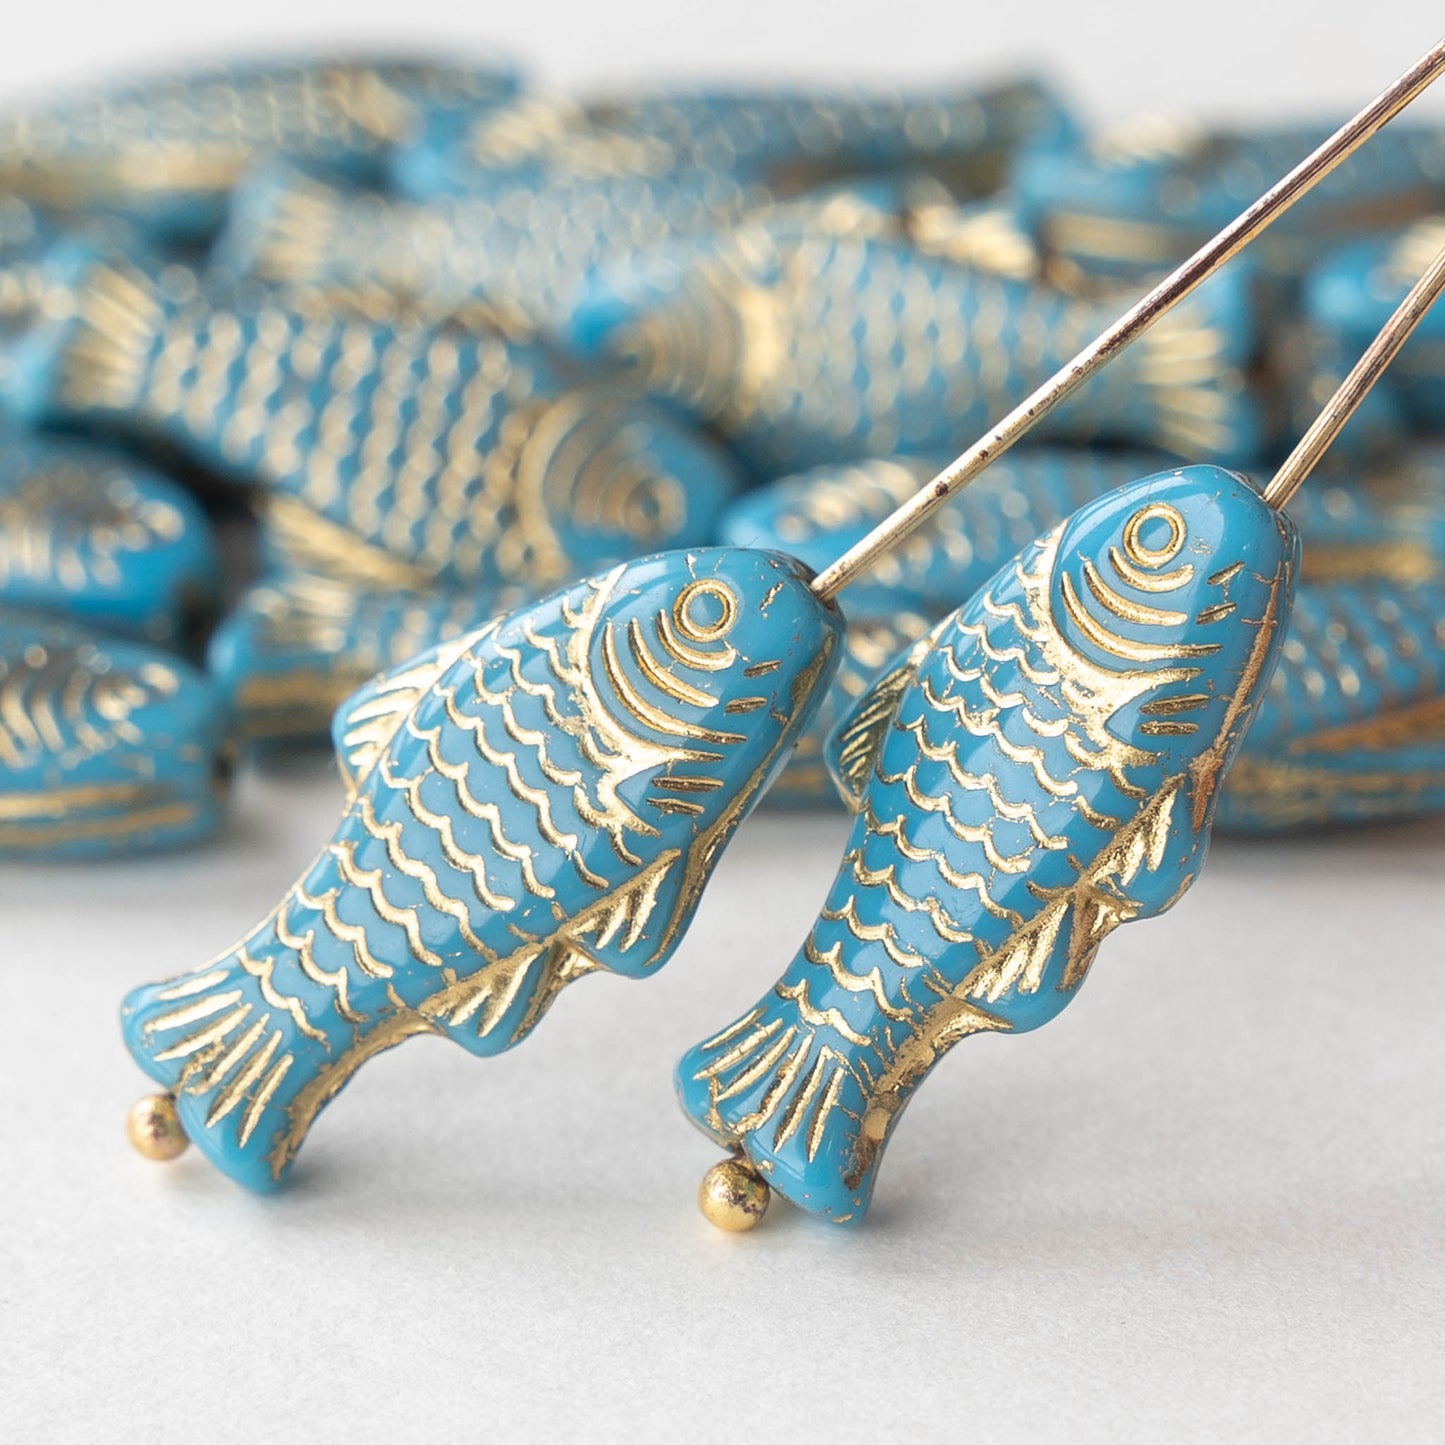 Glass Fish Beads - Teal with Gold Wash - 6 or 12